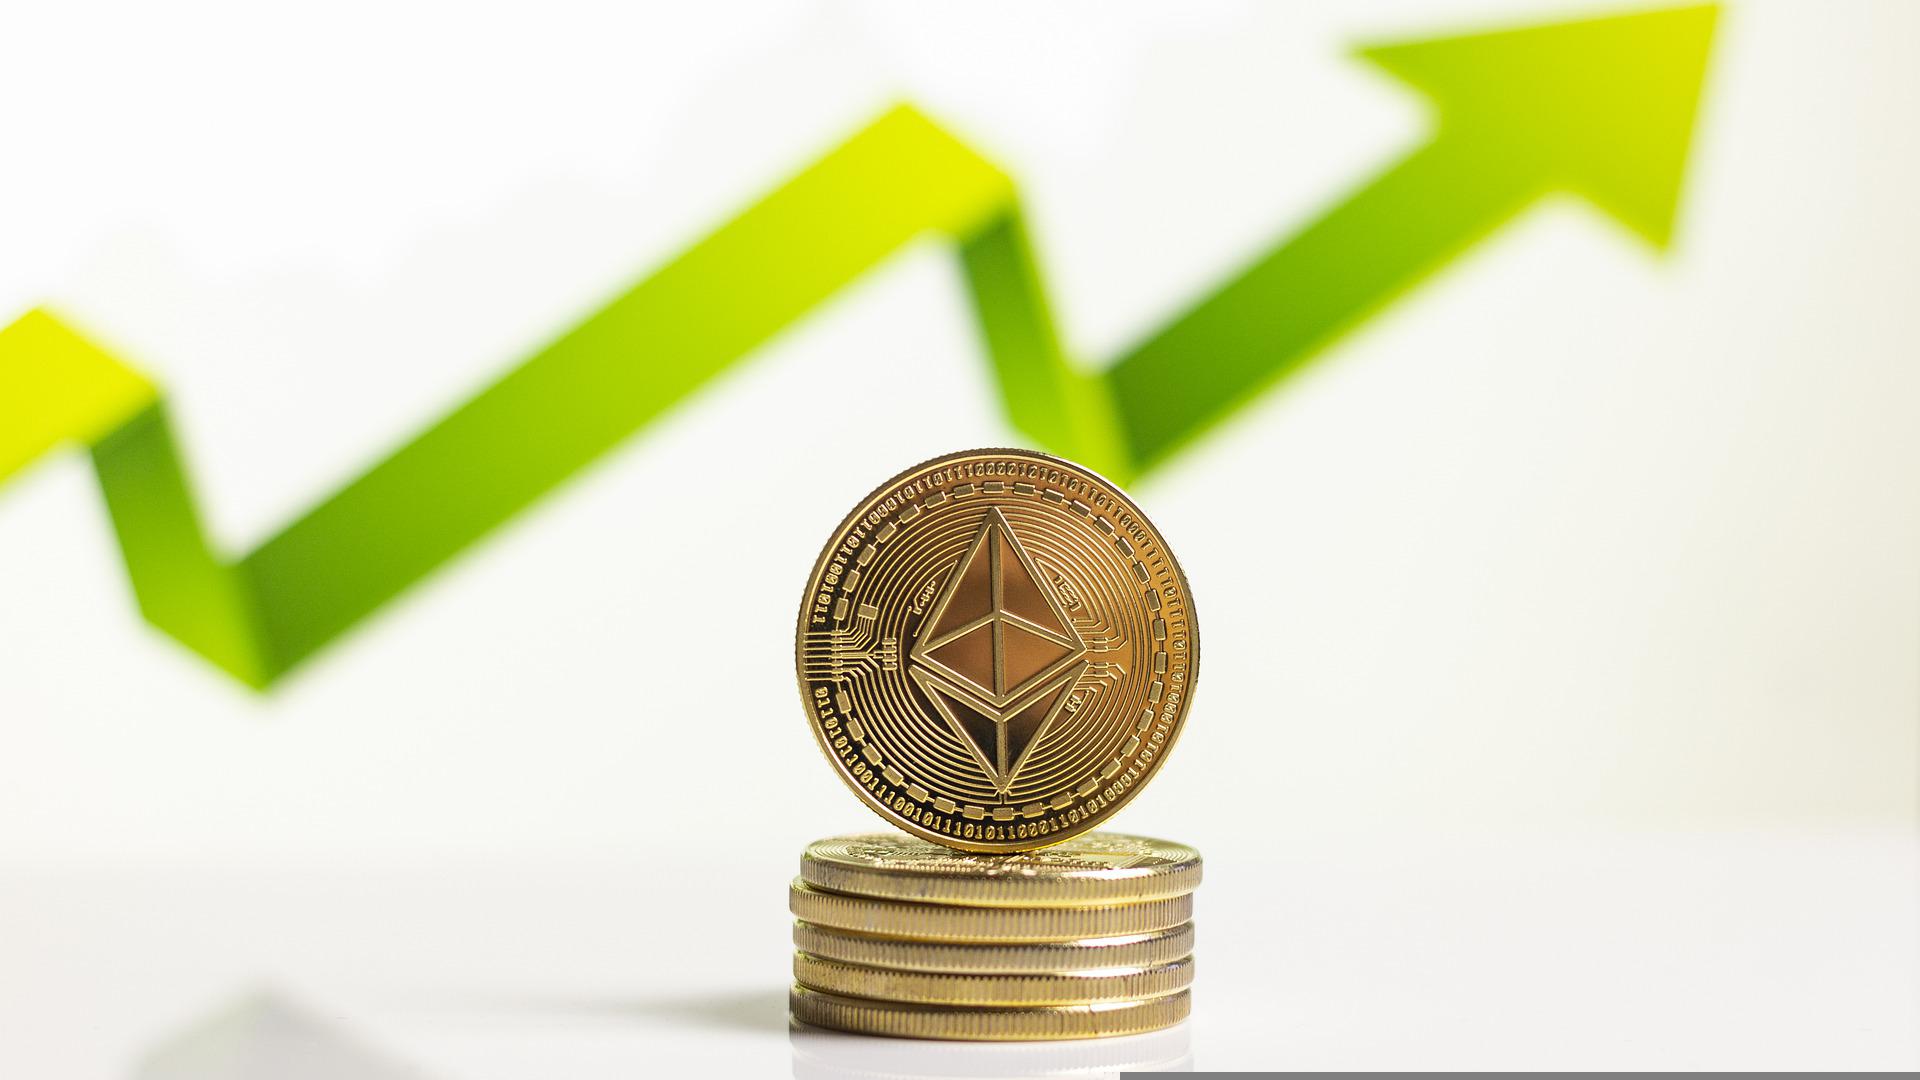 Investing in Ethereum? What you need to know about it and why it's not just another bitcoin